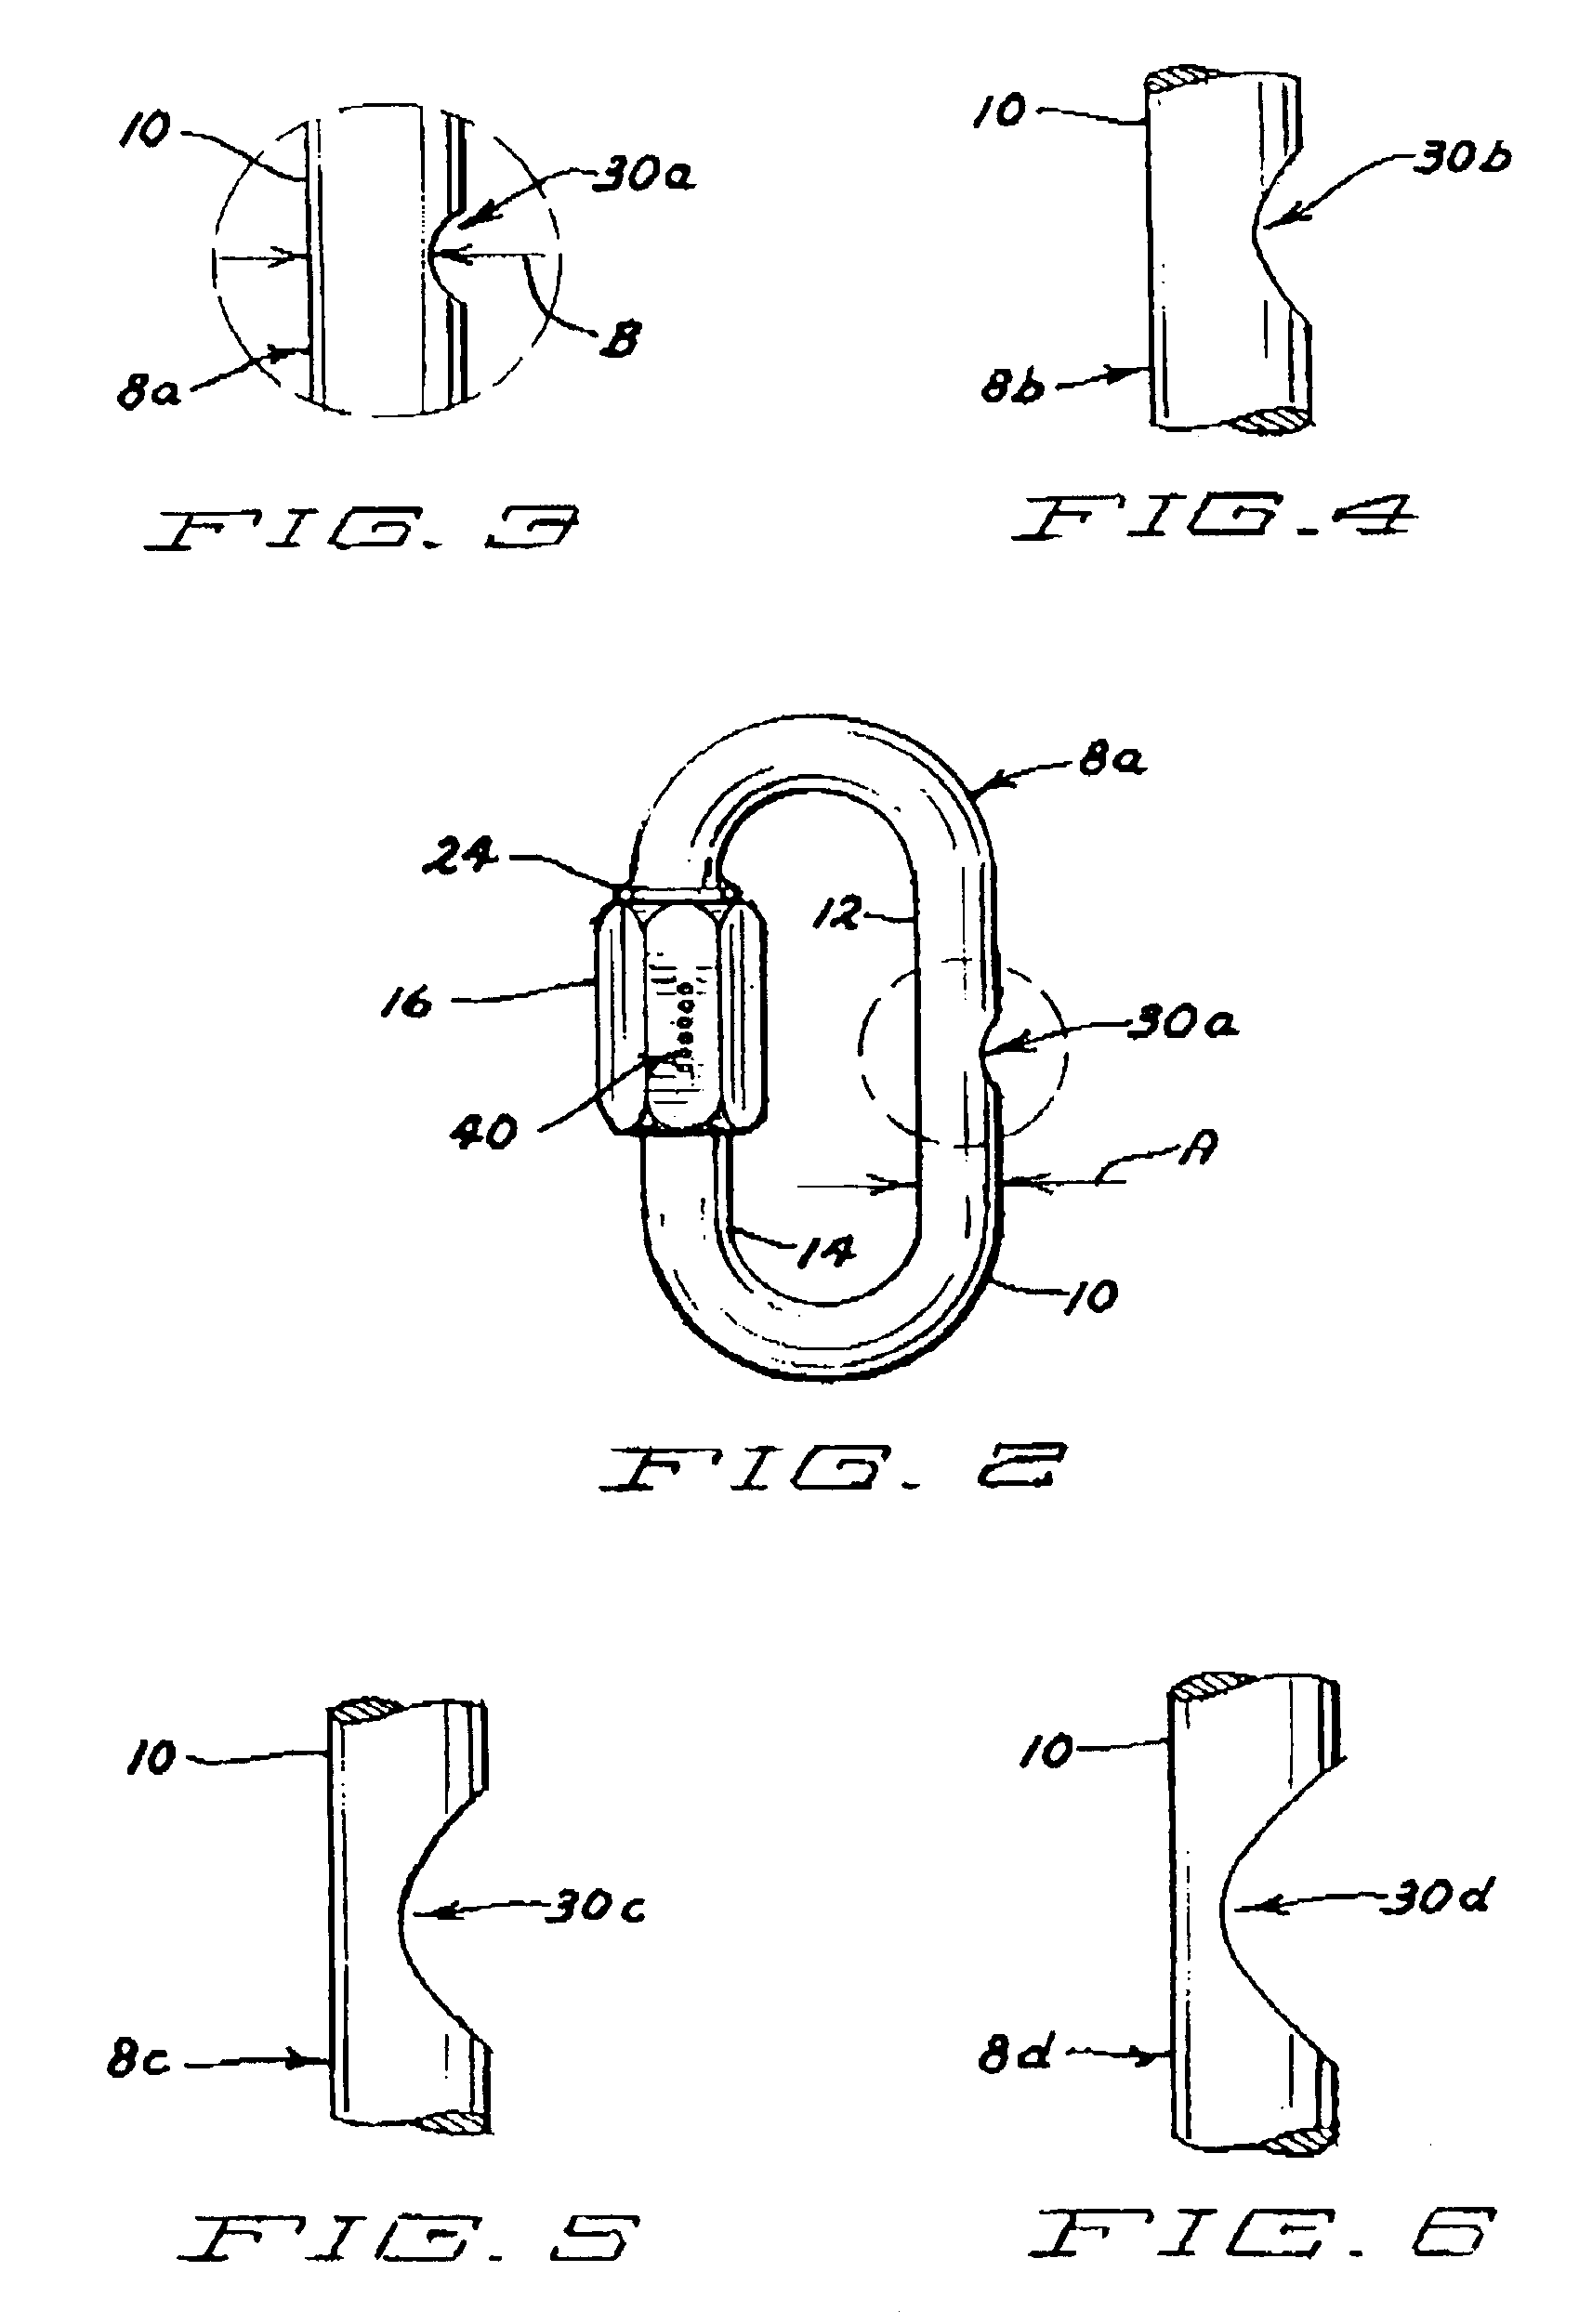 Load bearing device including overboard indicator